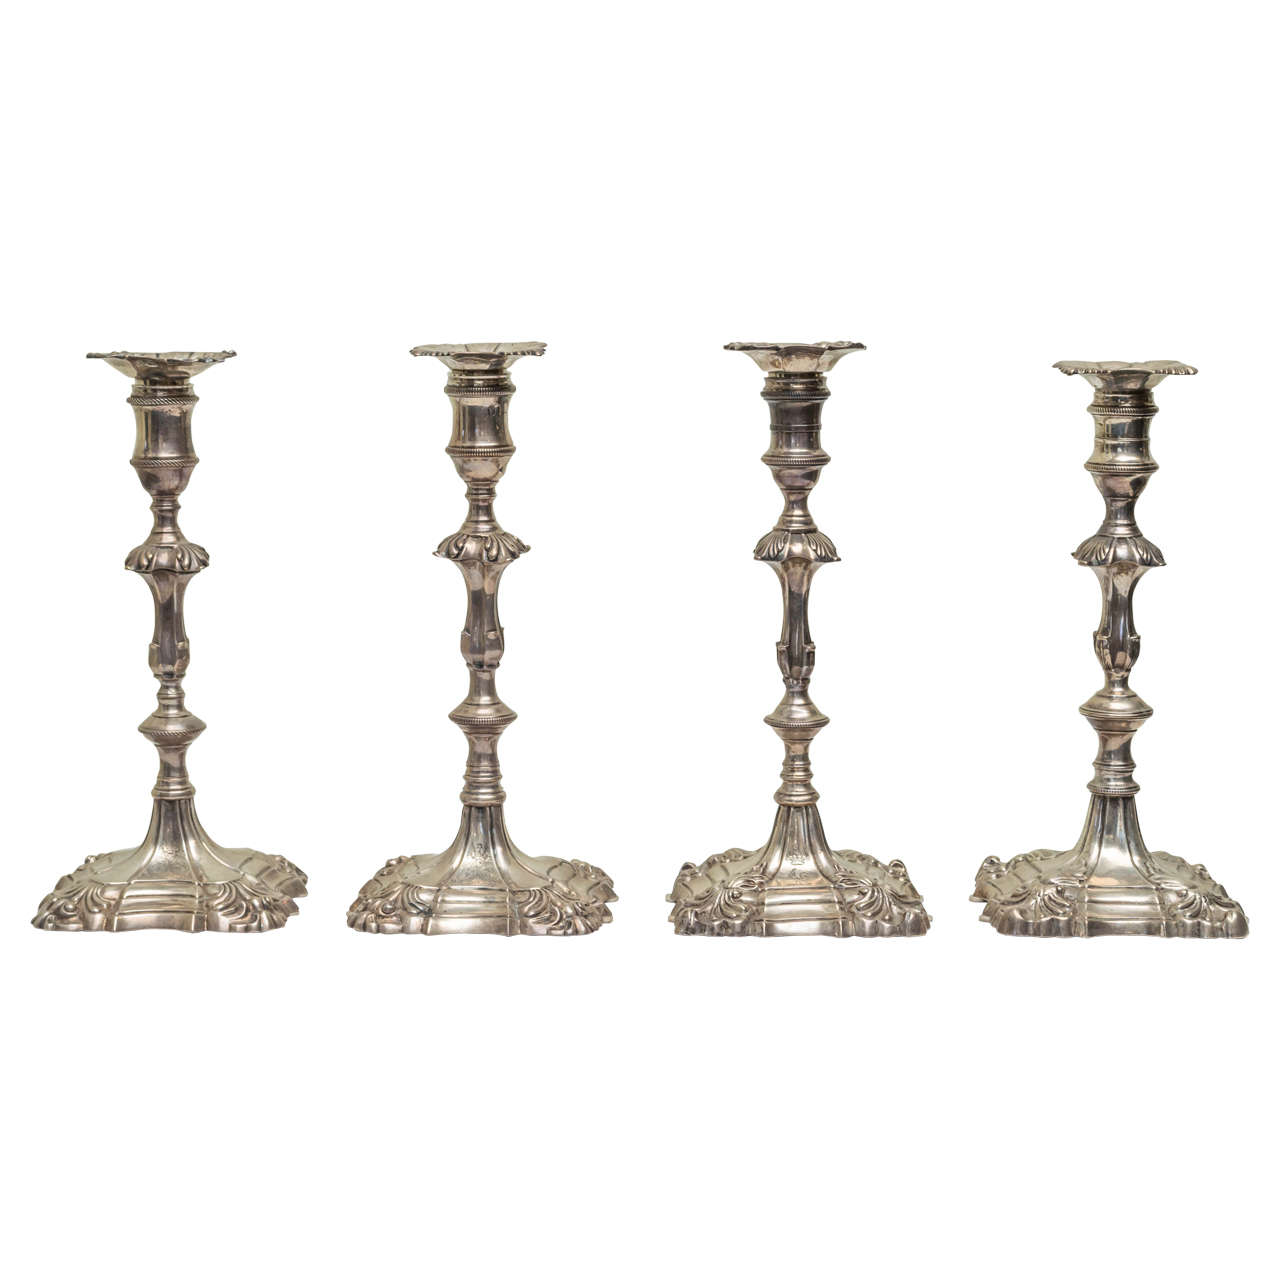 English Cast Sterling Silver Candlesticks in an Assembled Set of Four